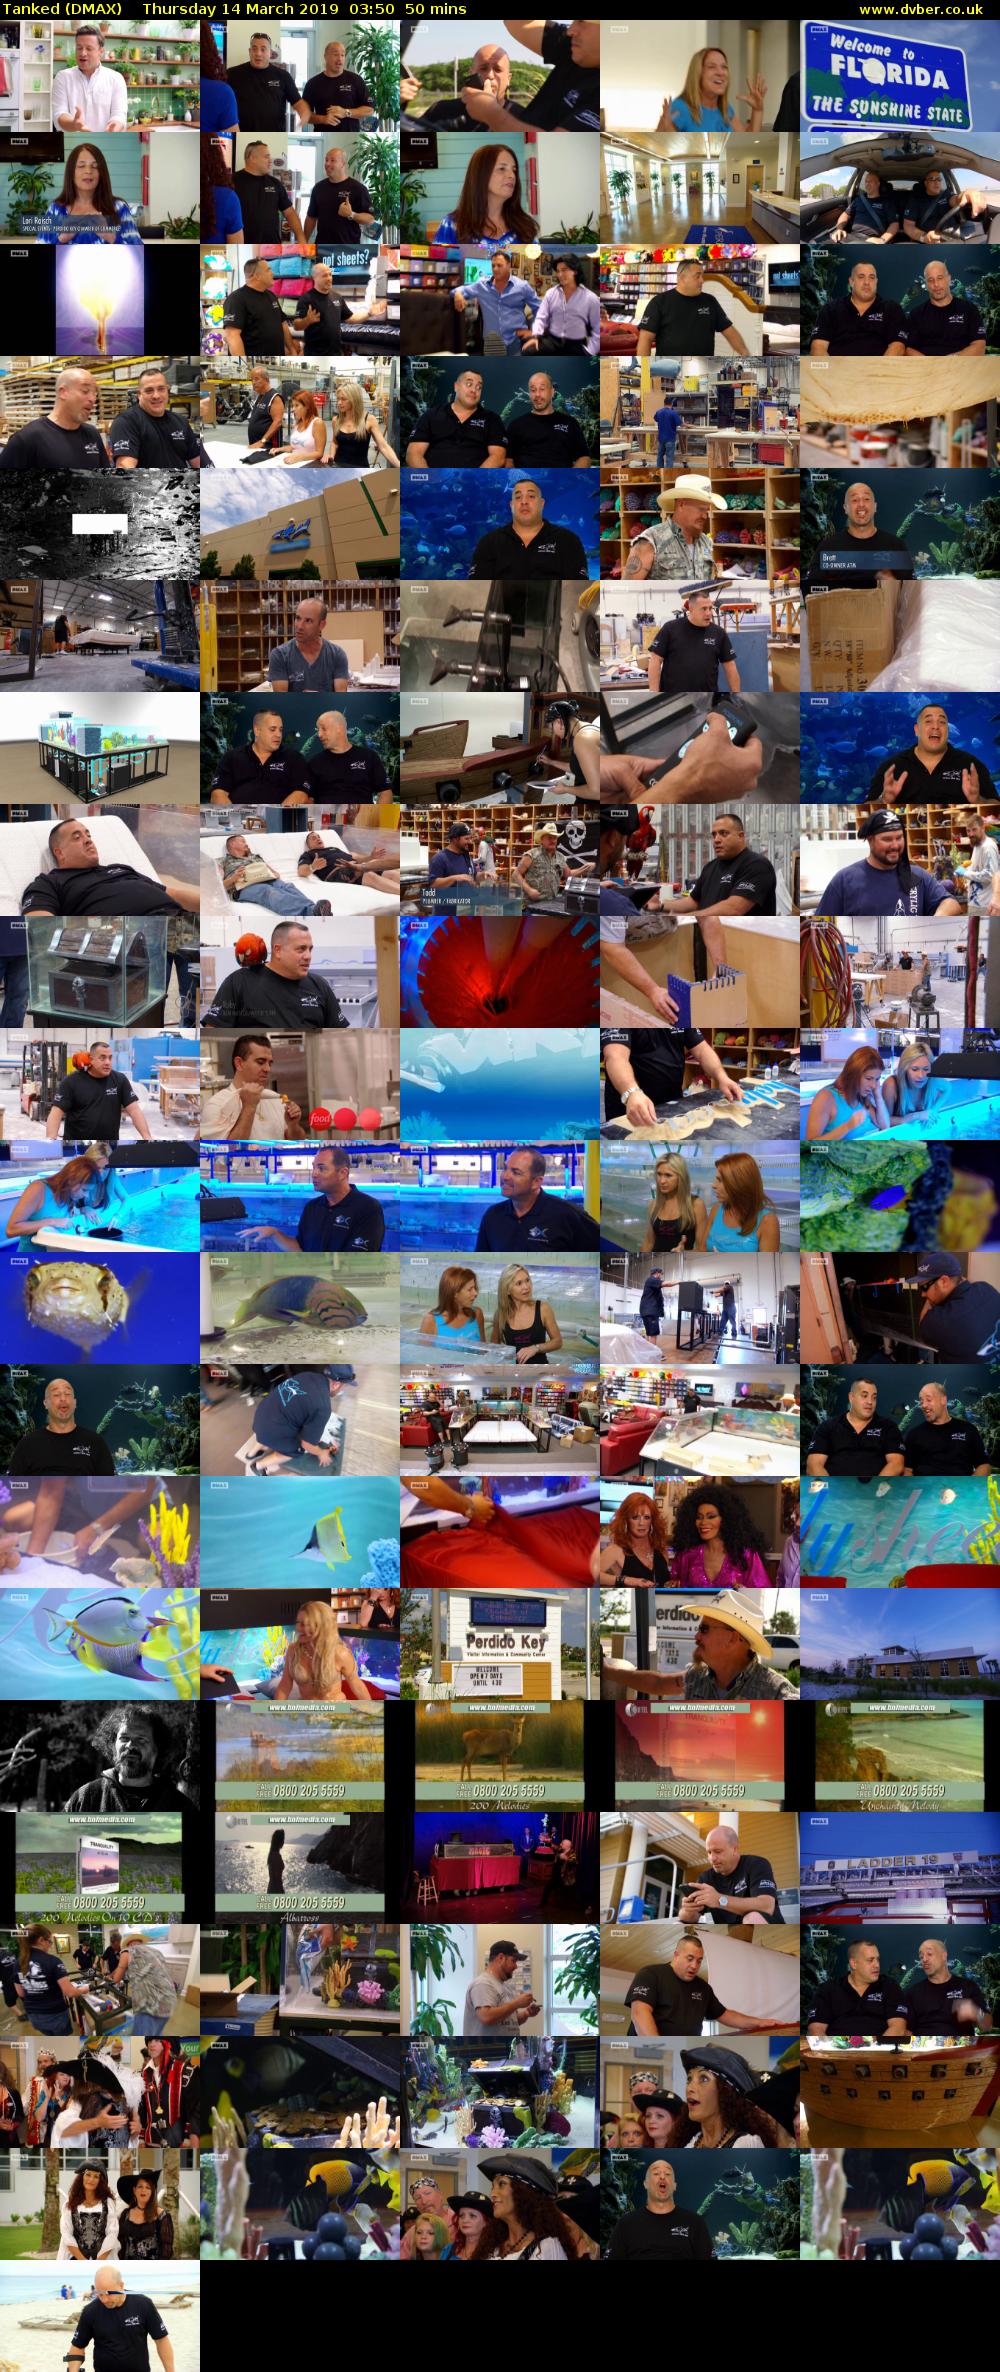 Tanked (DMAX) Thursday 14 March 2019 03:50 - 04:40